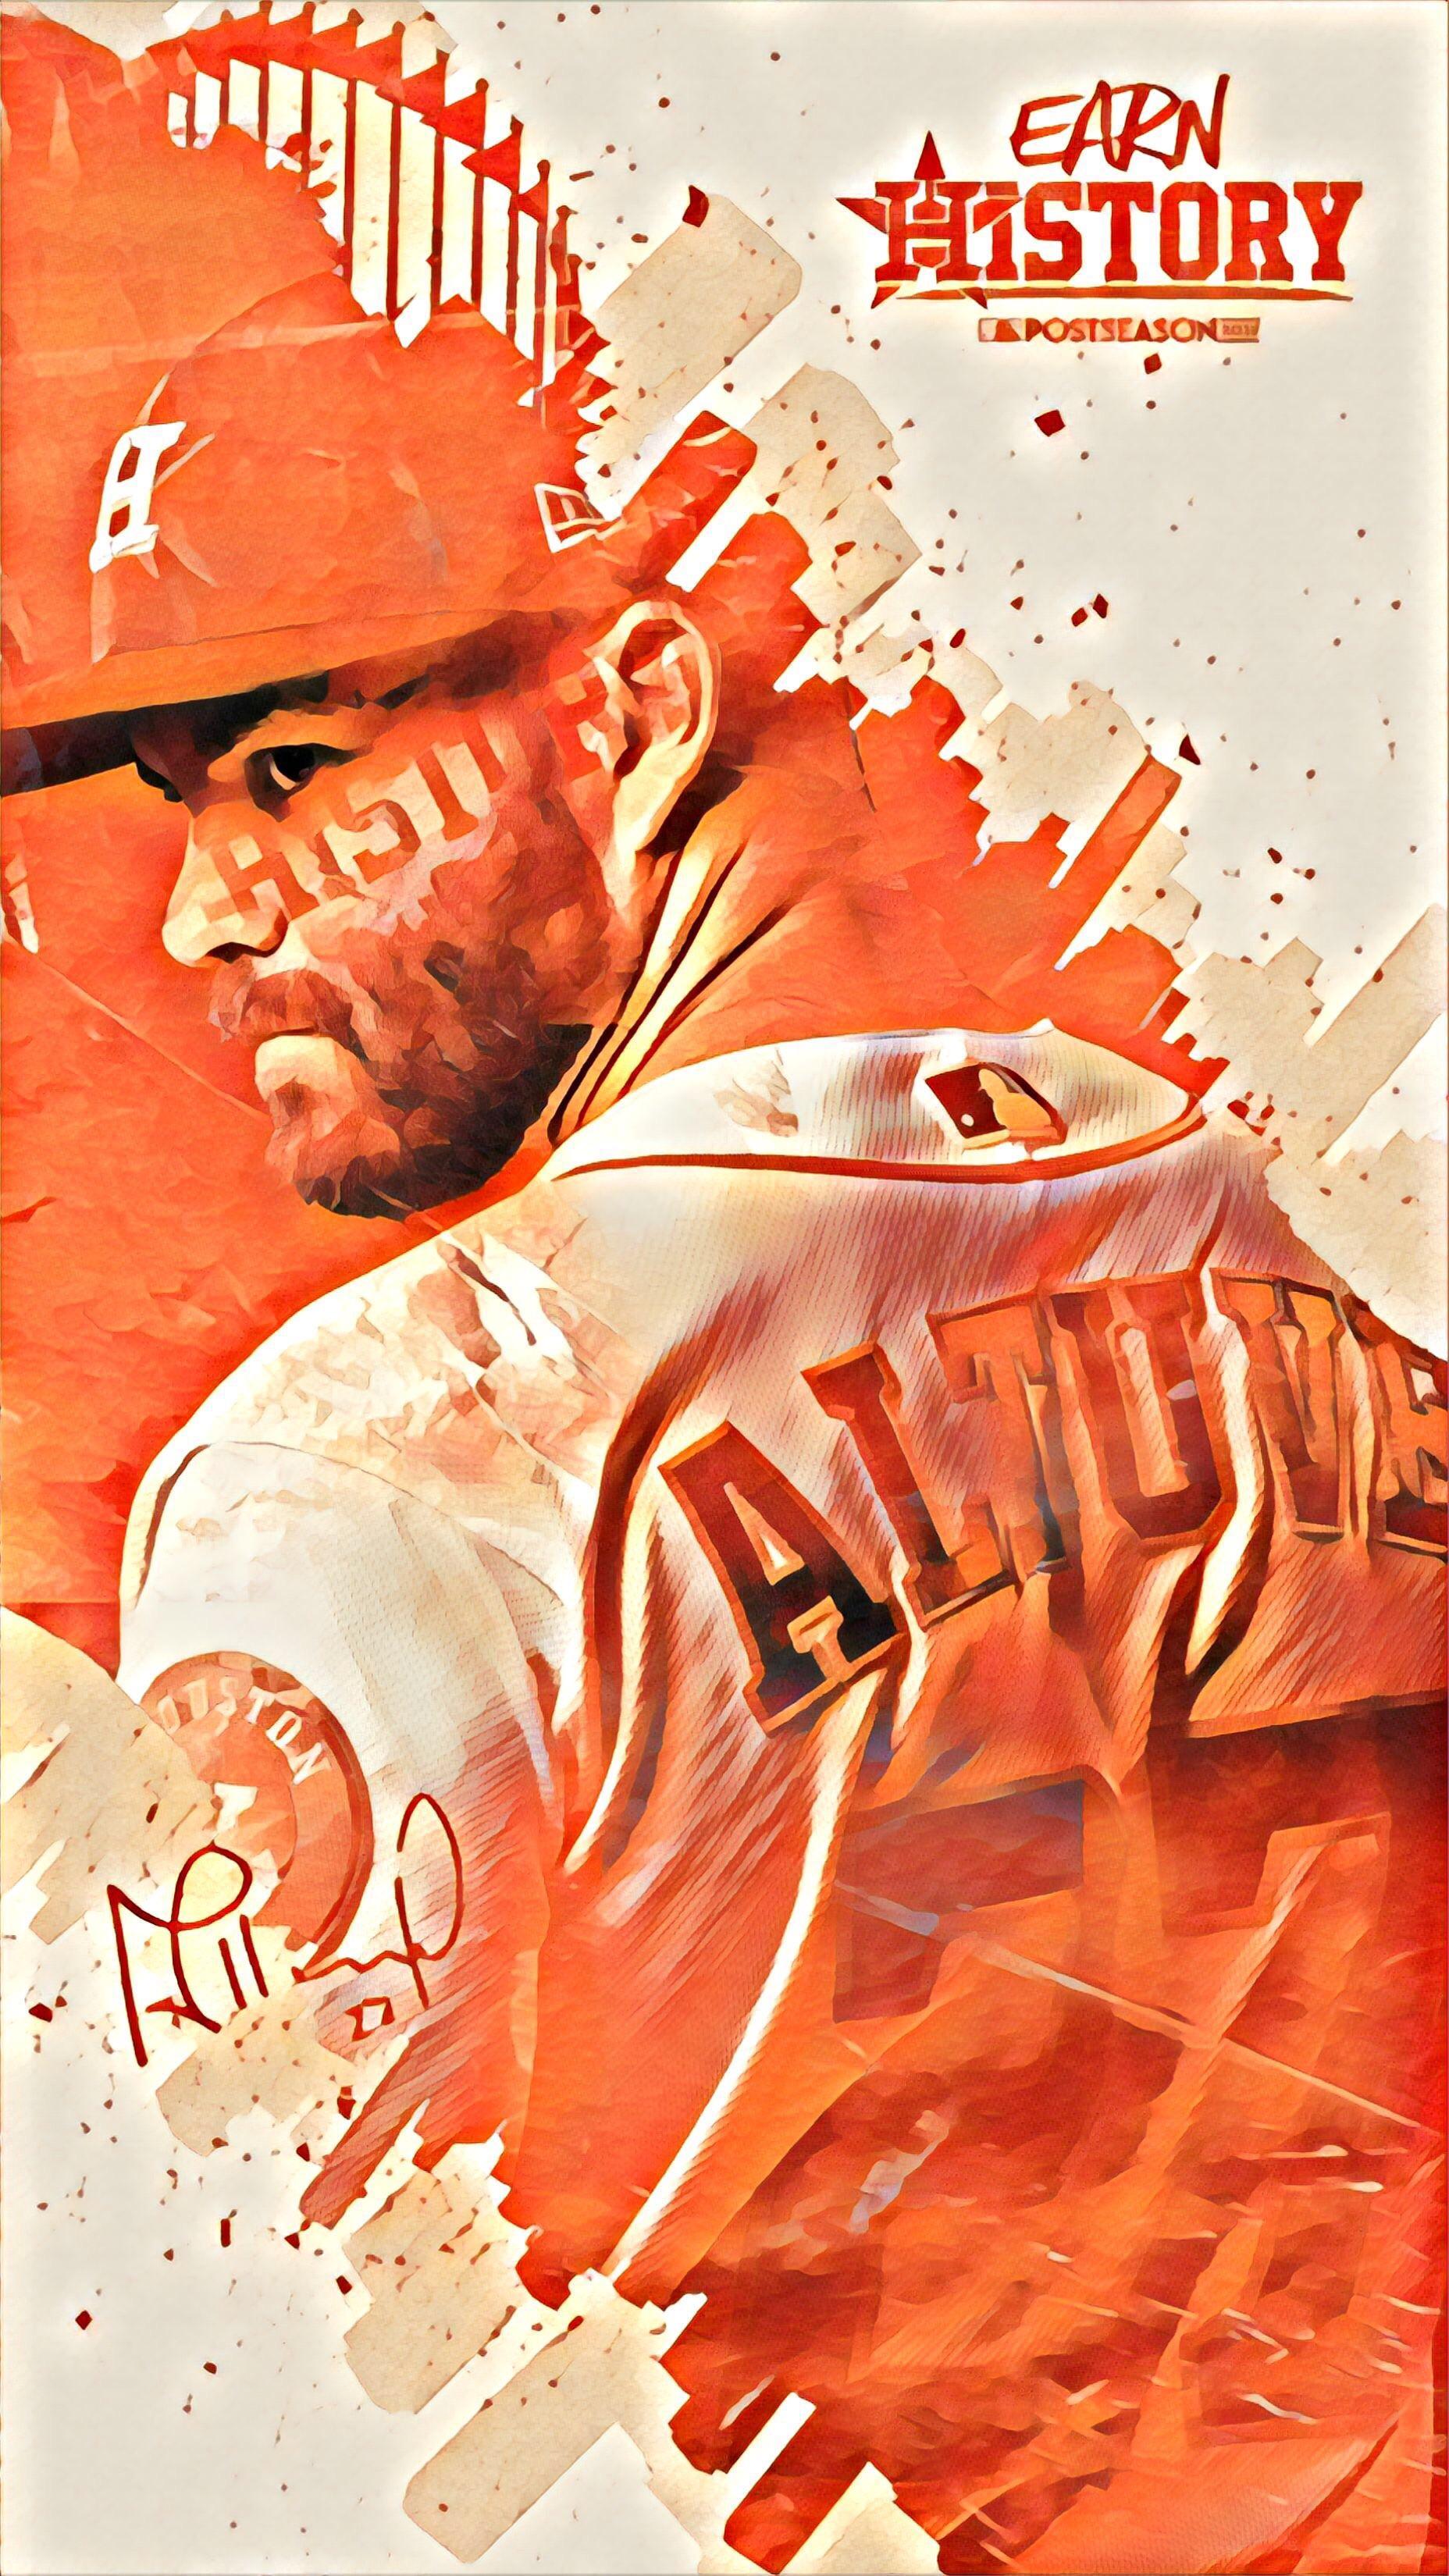 Astros Iphone Wallpapers